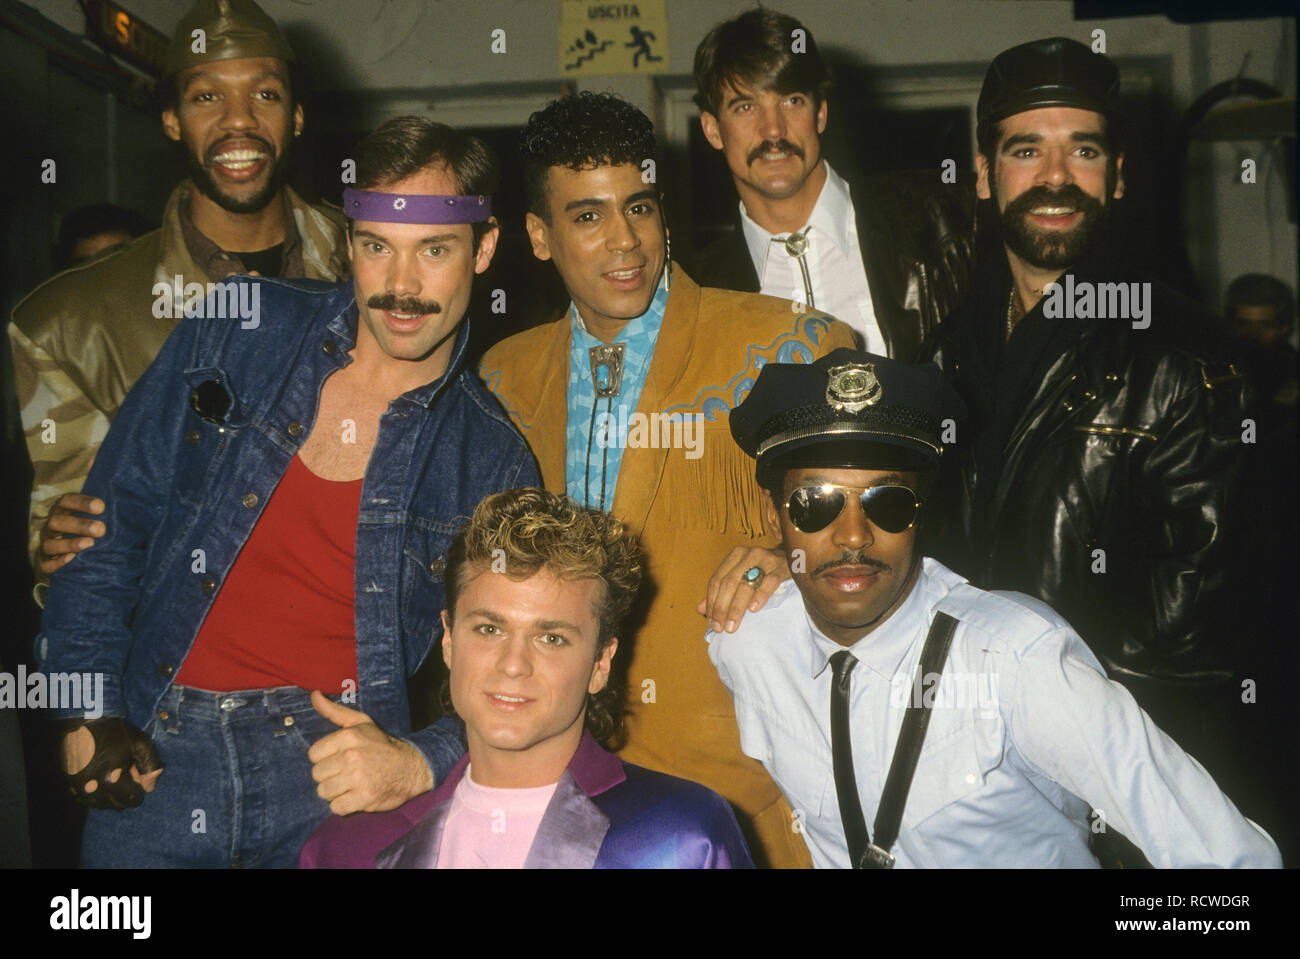 VILLAGE PEOPLE US pop group about 1979 Stock Photo